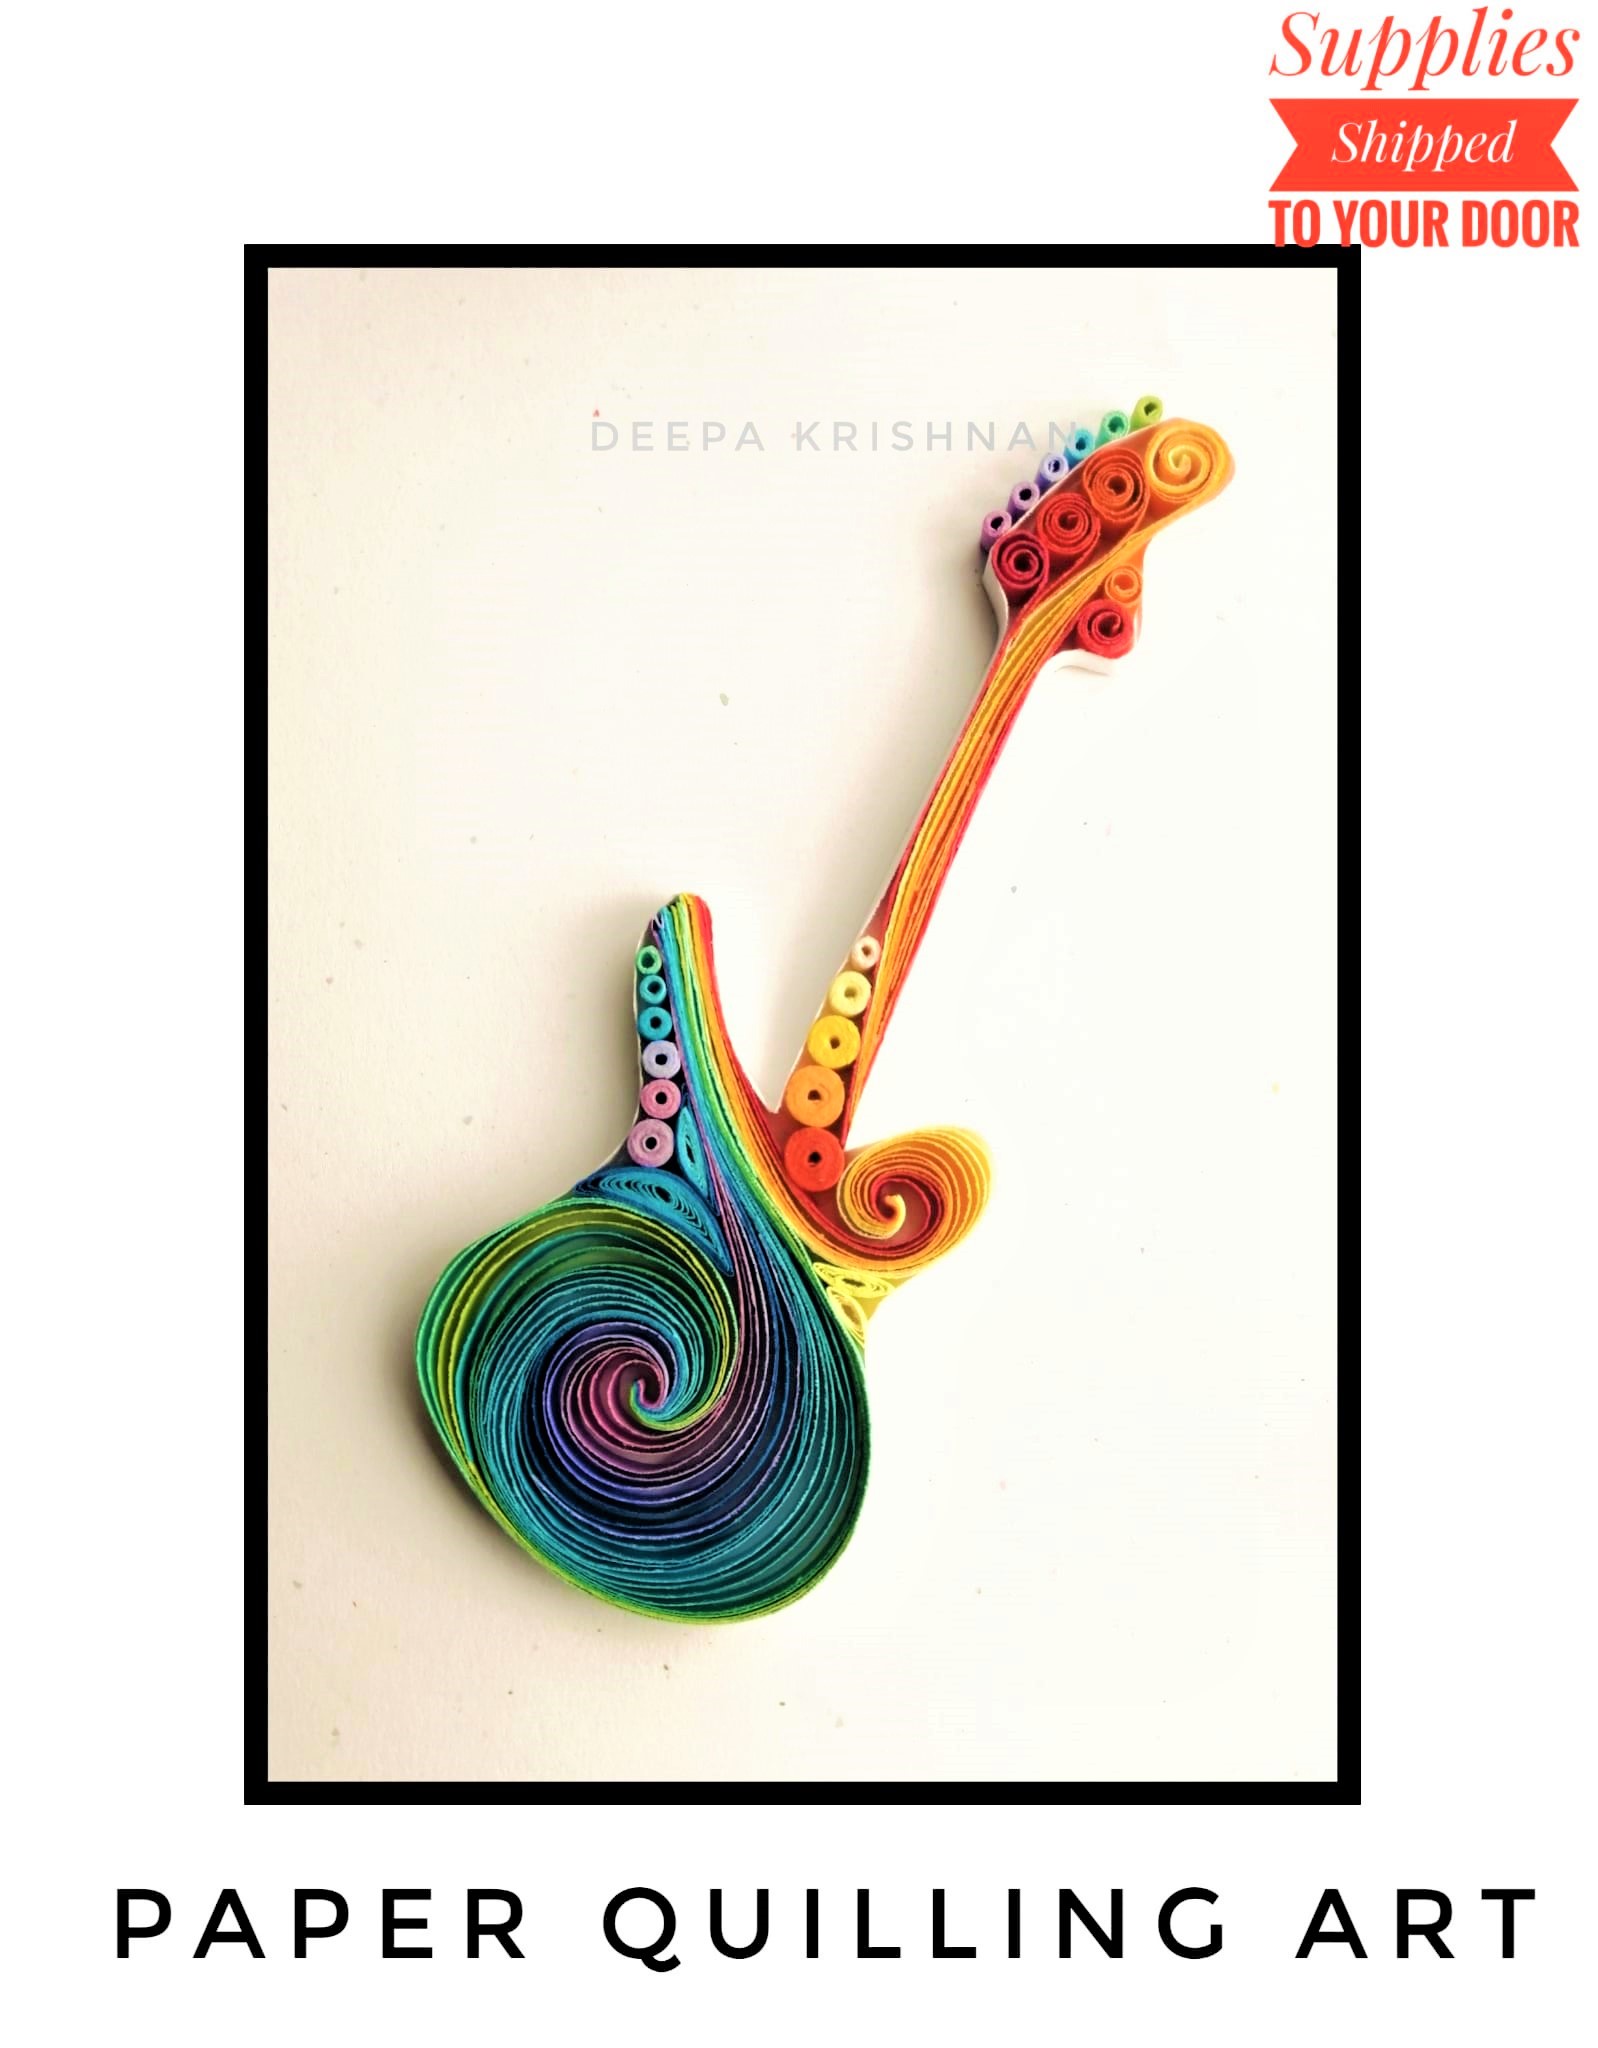 A Paper Quilling  Guitar Supplies Included experience project by Yaymaker